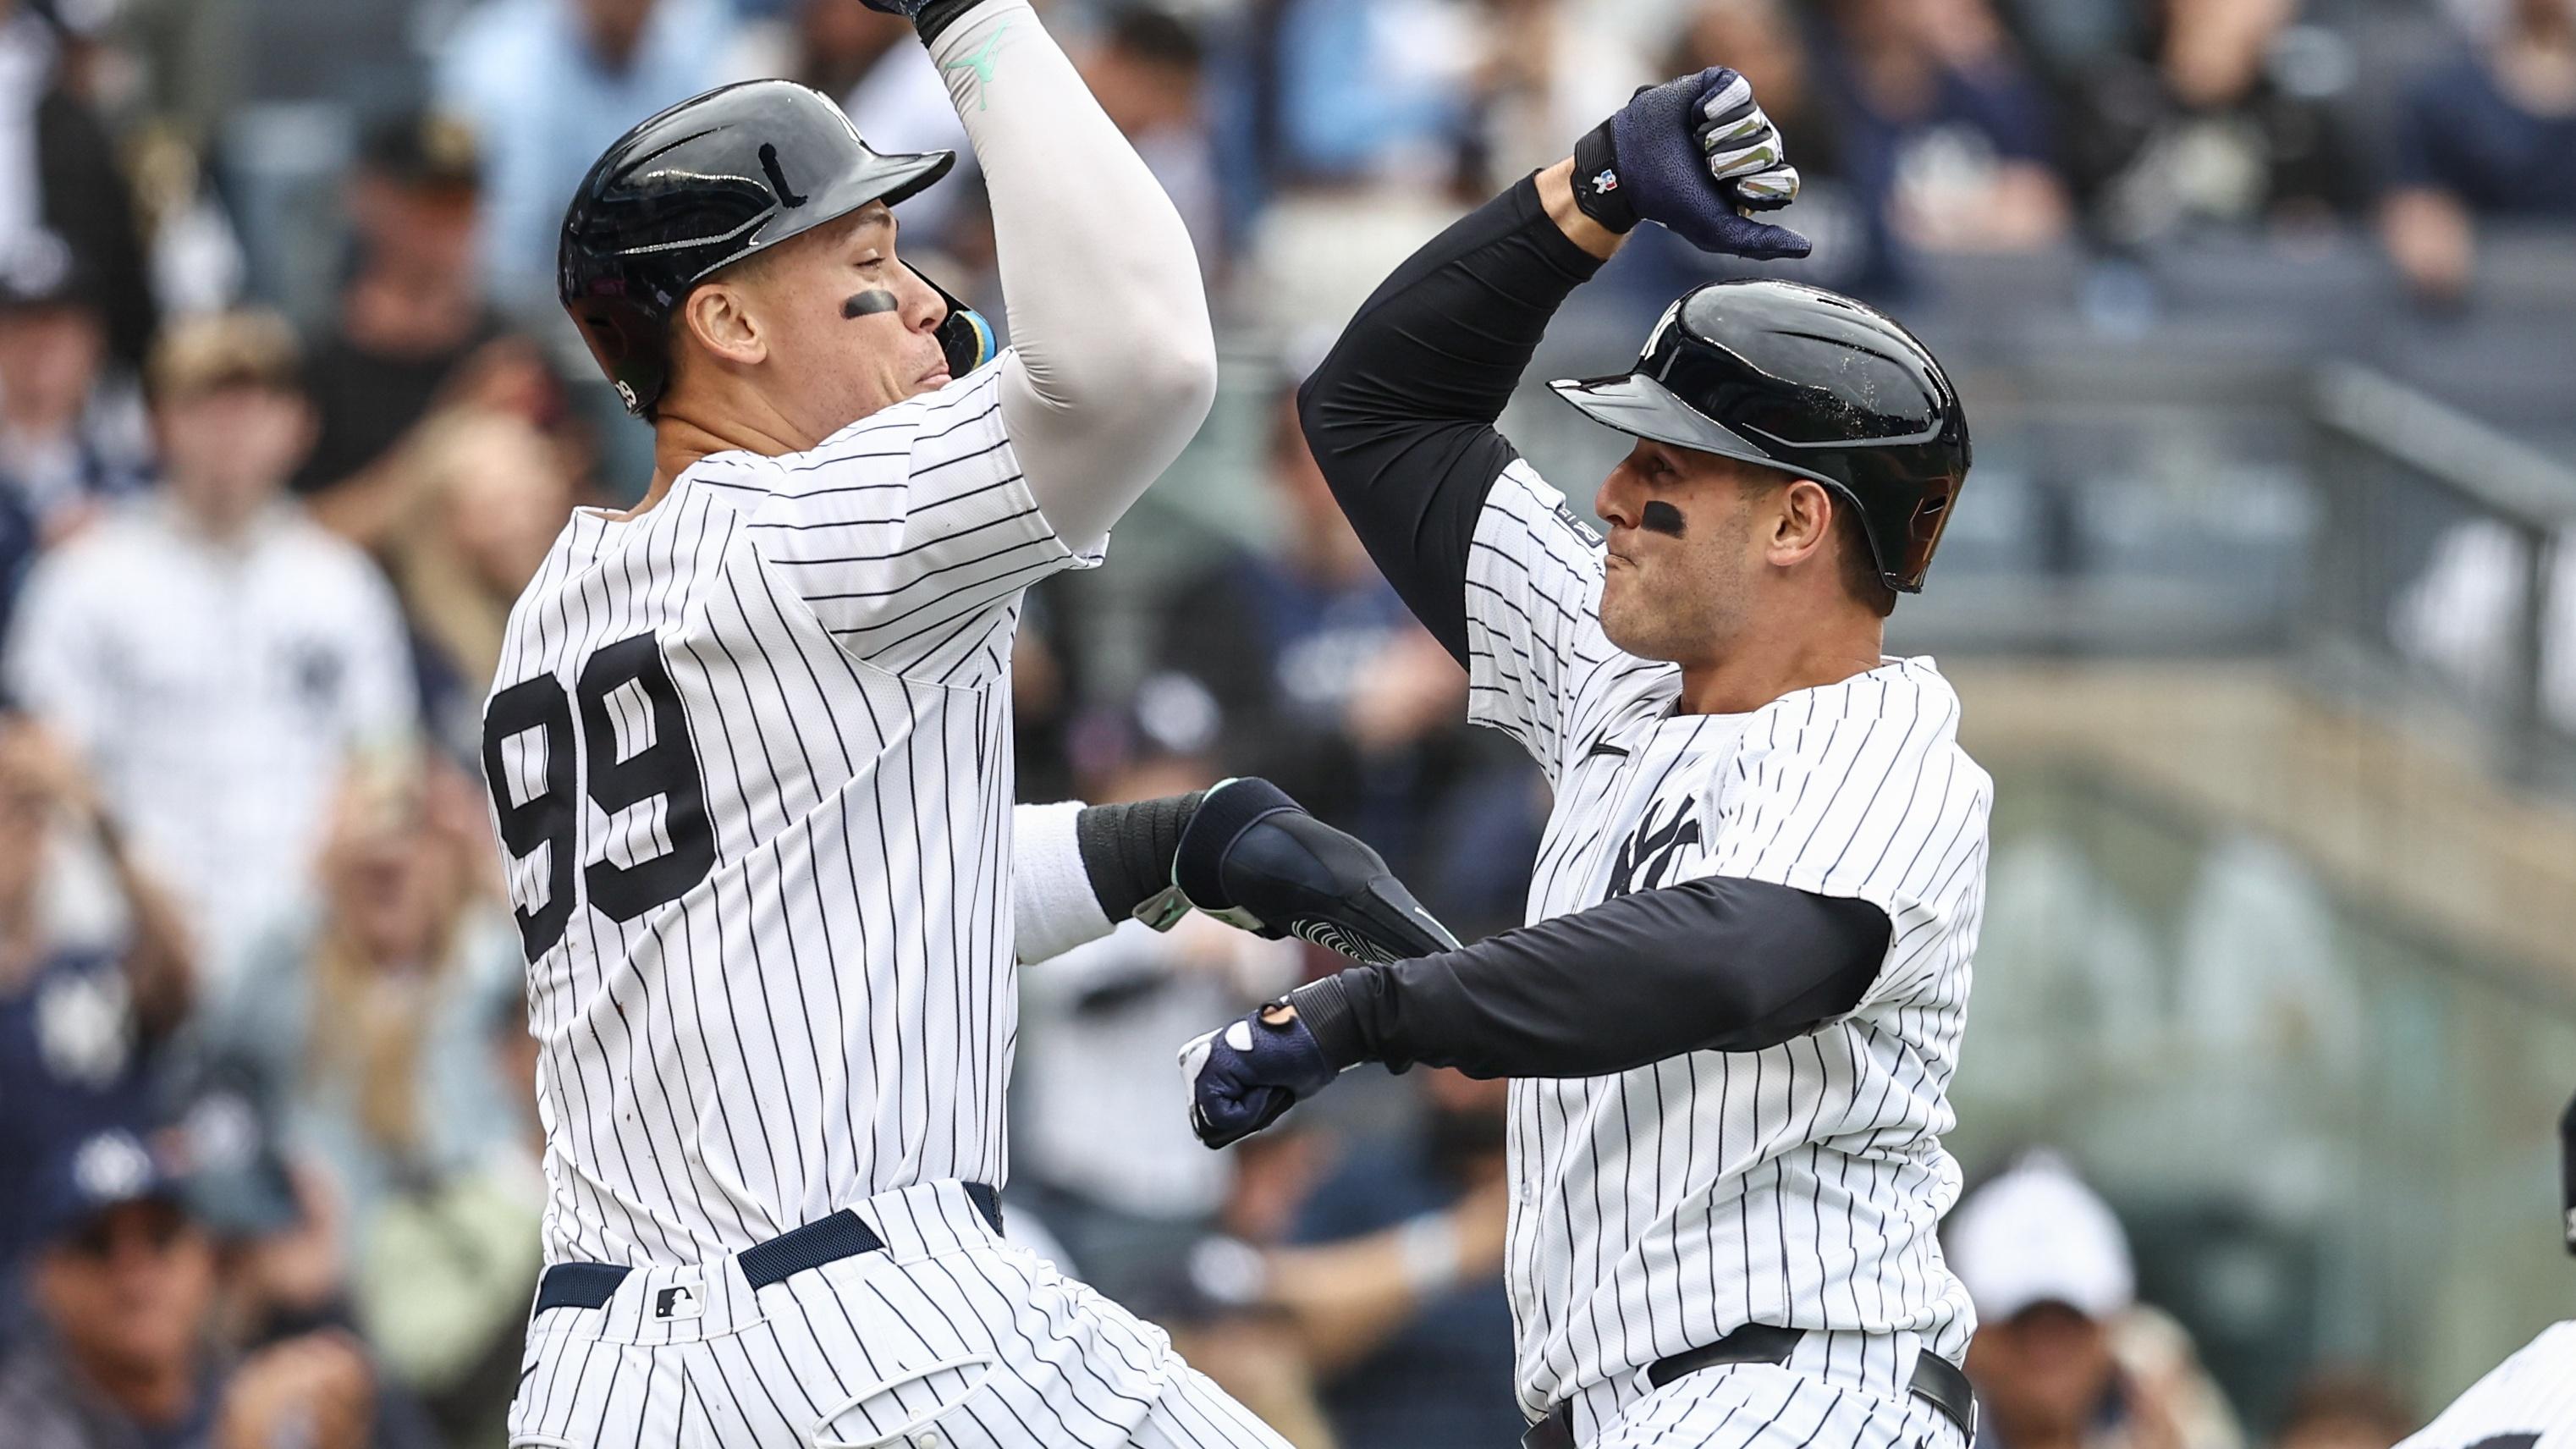 New York Yankees first baseman Anthony Rizzo (48) celebrates with center fielder Aaron Judge (99) after hitting a three run home run in the third inning against the Detroit Tigers at Yankee Stadium / Wendell Cruz - USA TODAY Sports